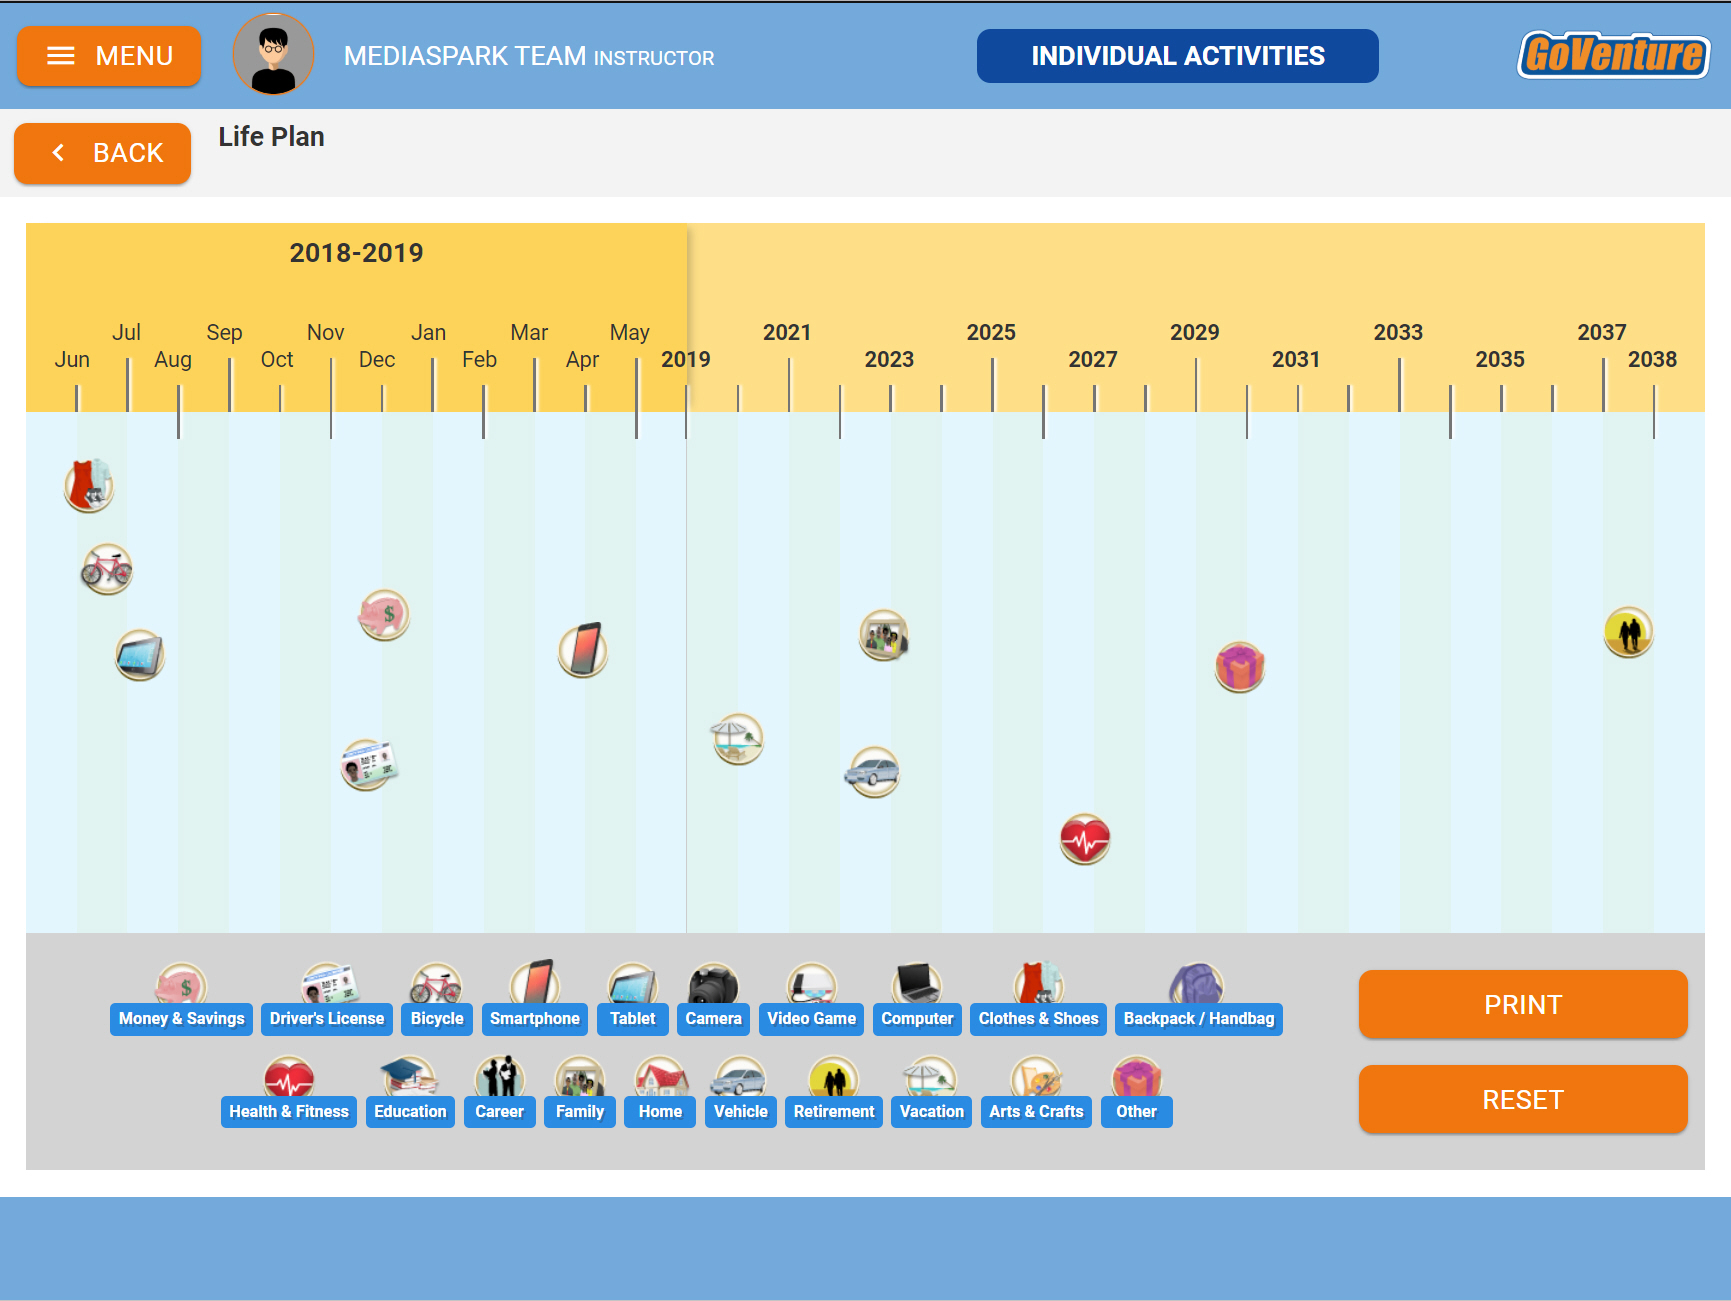 An image of the GoVenture Visual Calendar